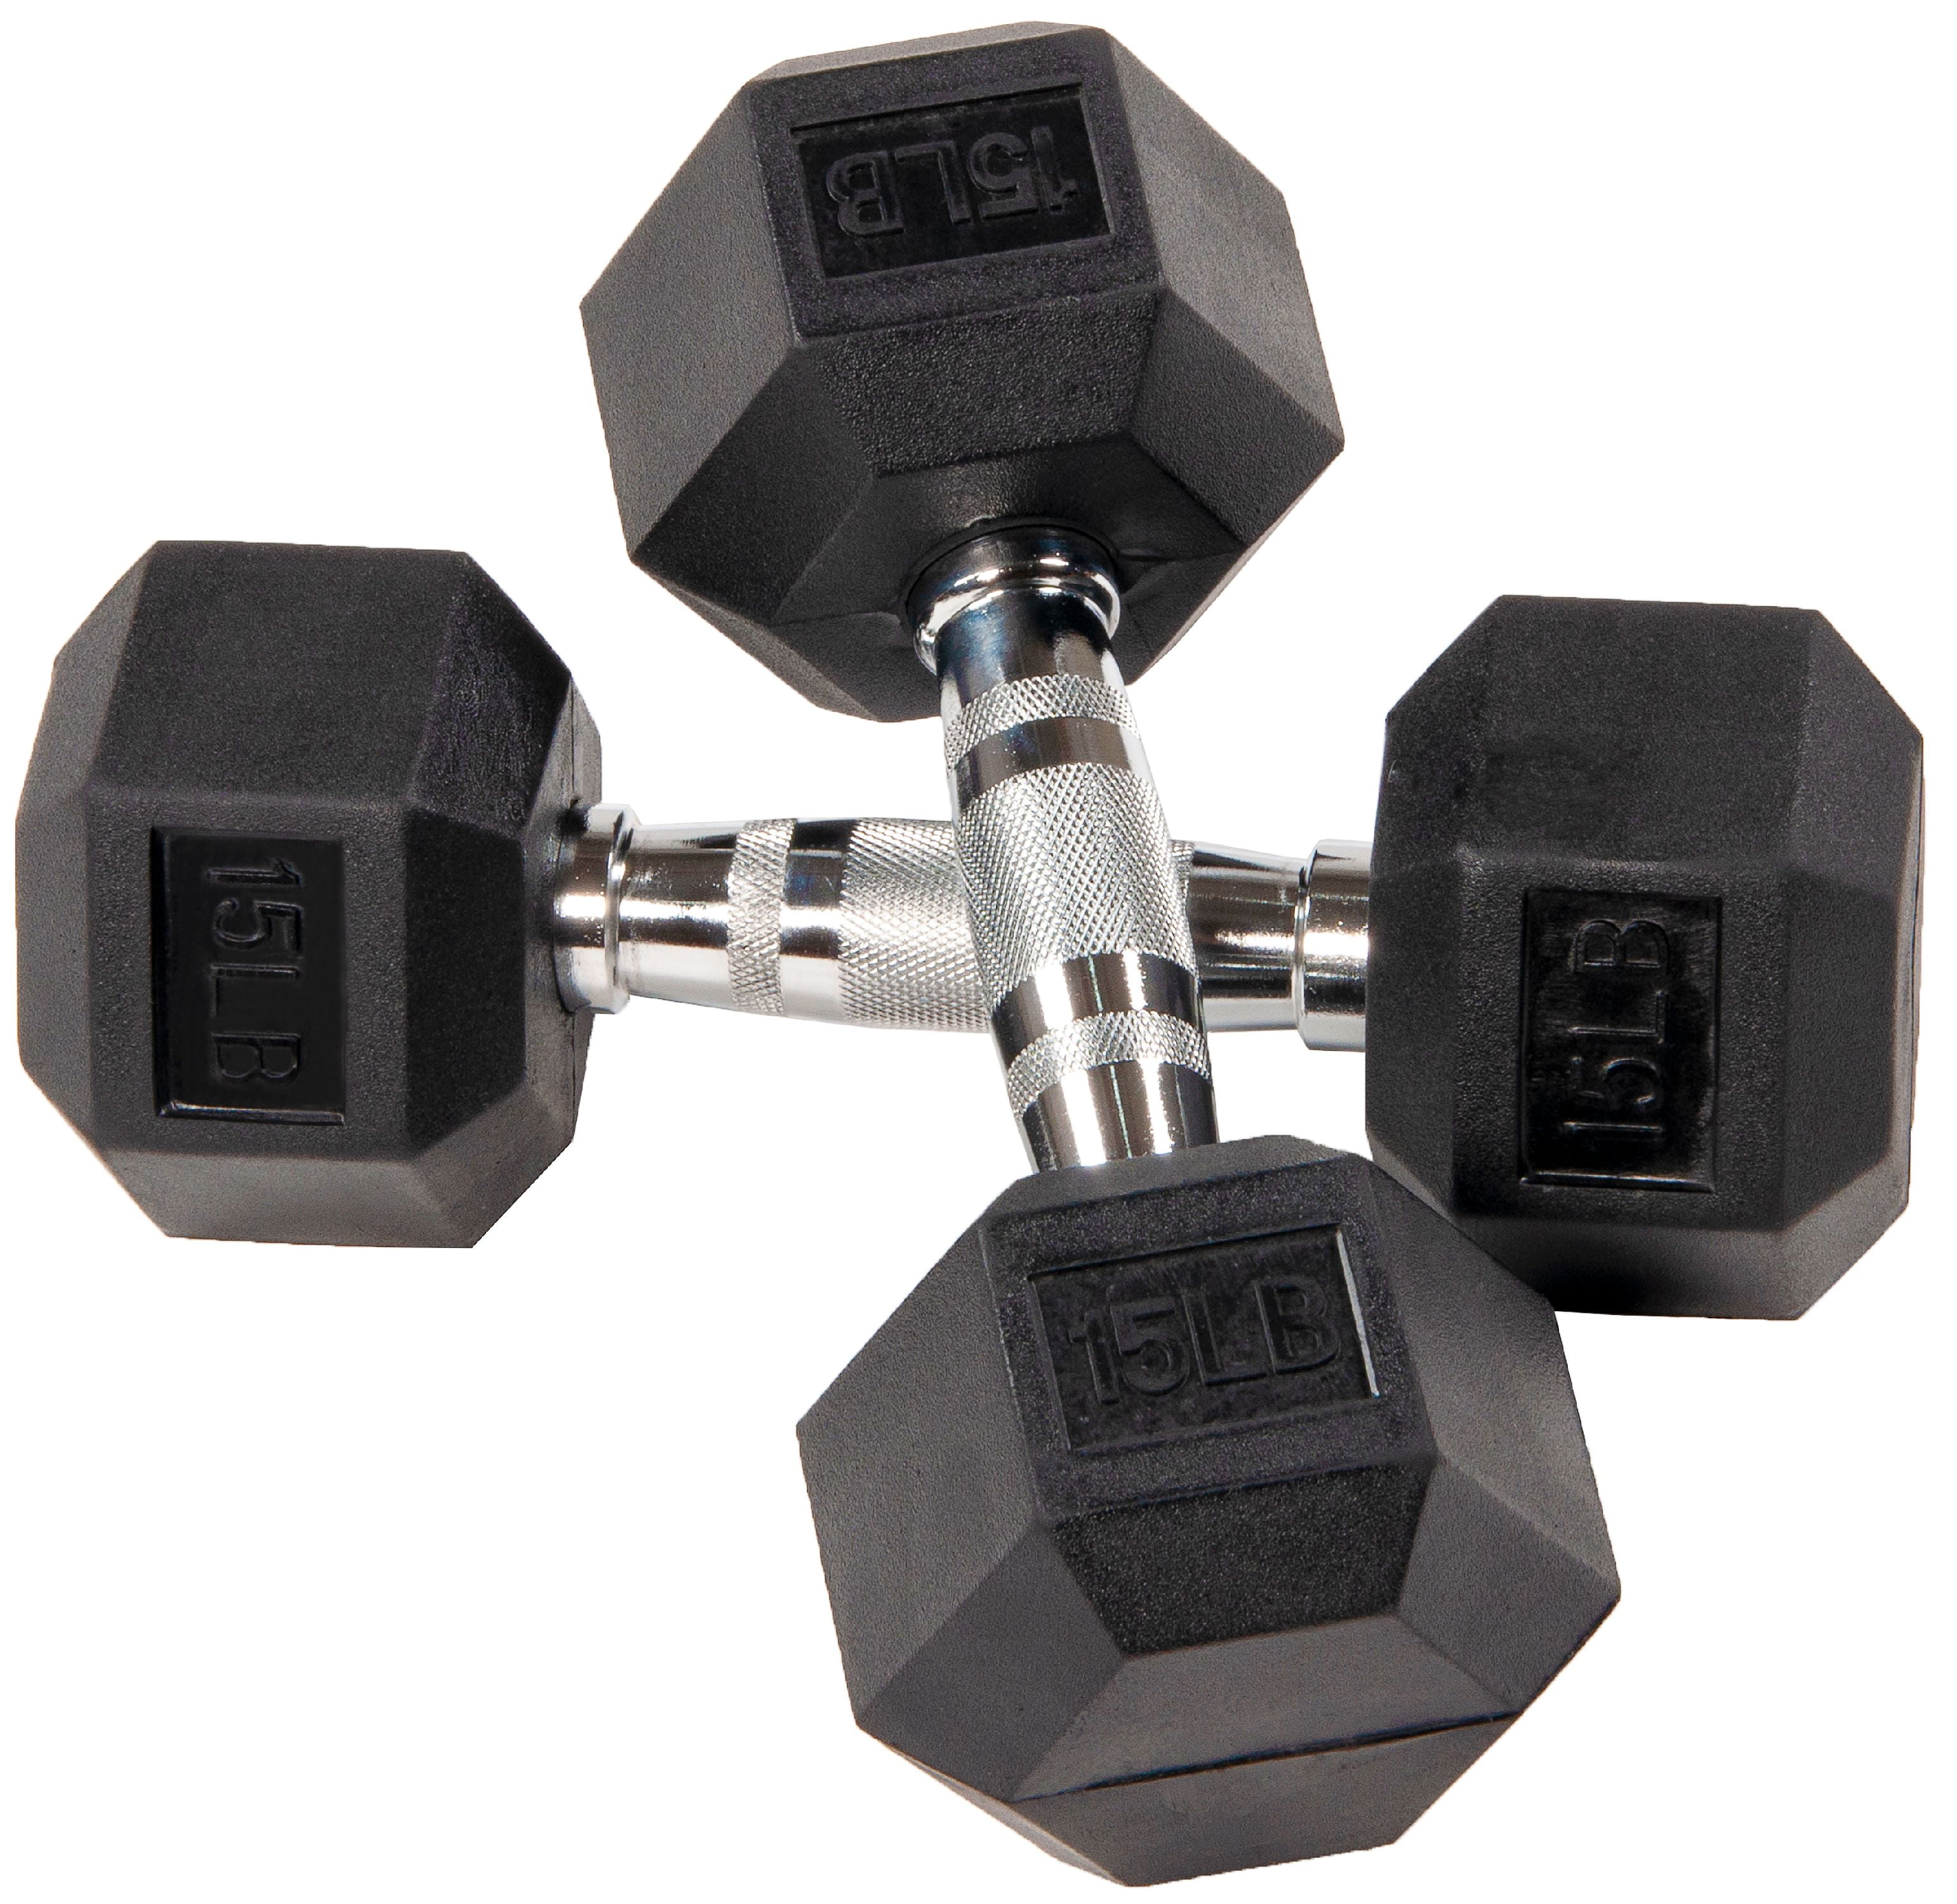 30 NEW FRAY FITNESS RUBBER HEX DUMBBELLS select-weight 10,15 20 25 40LB 35 